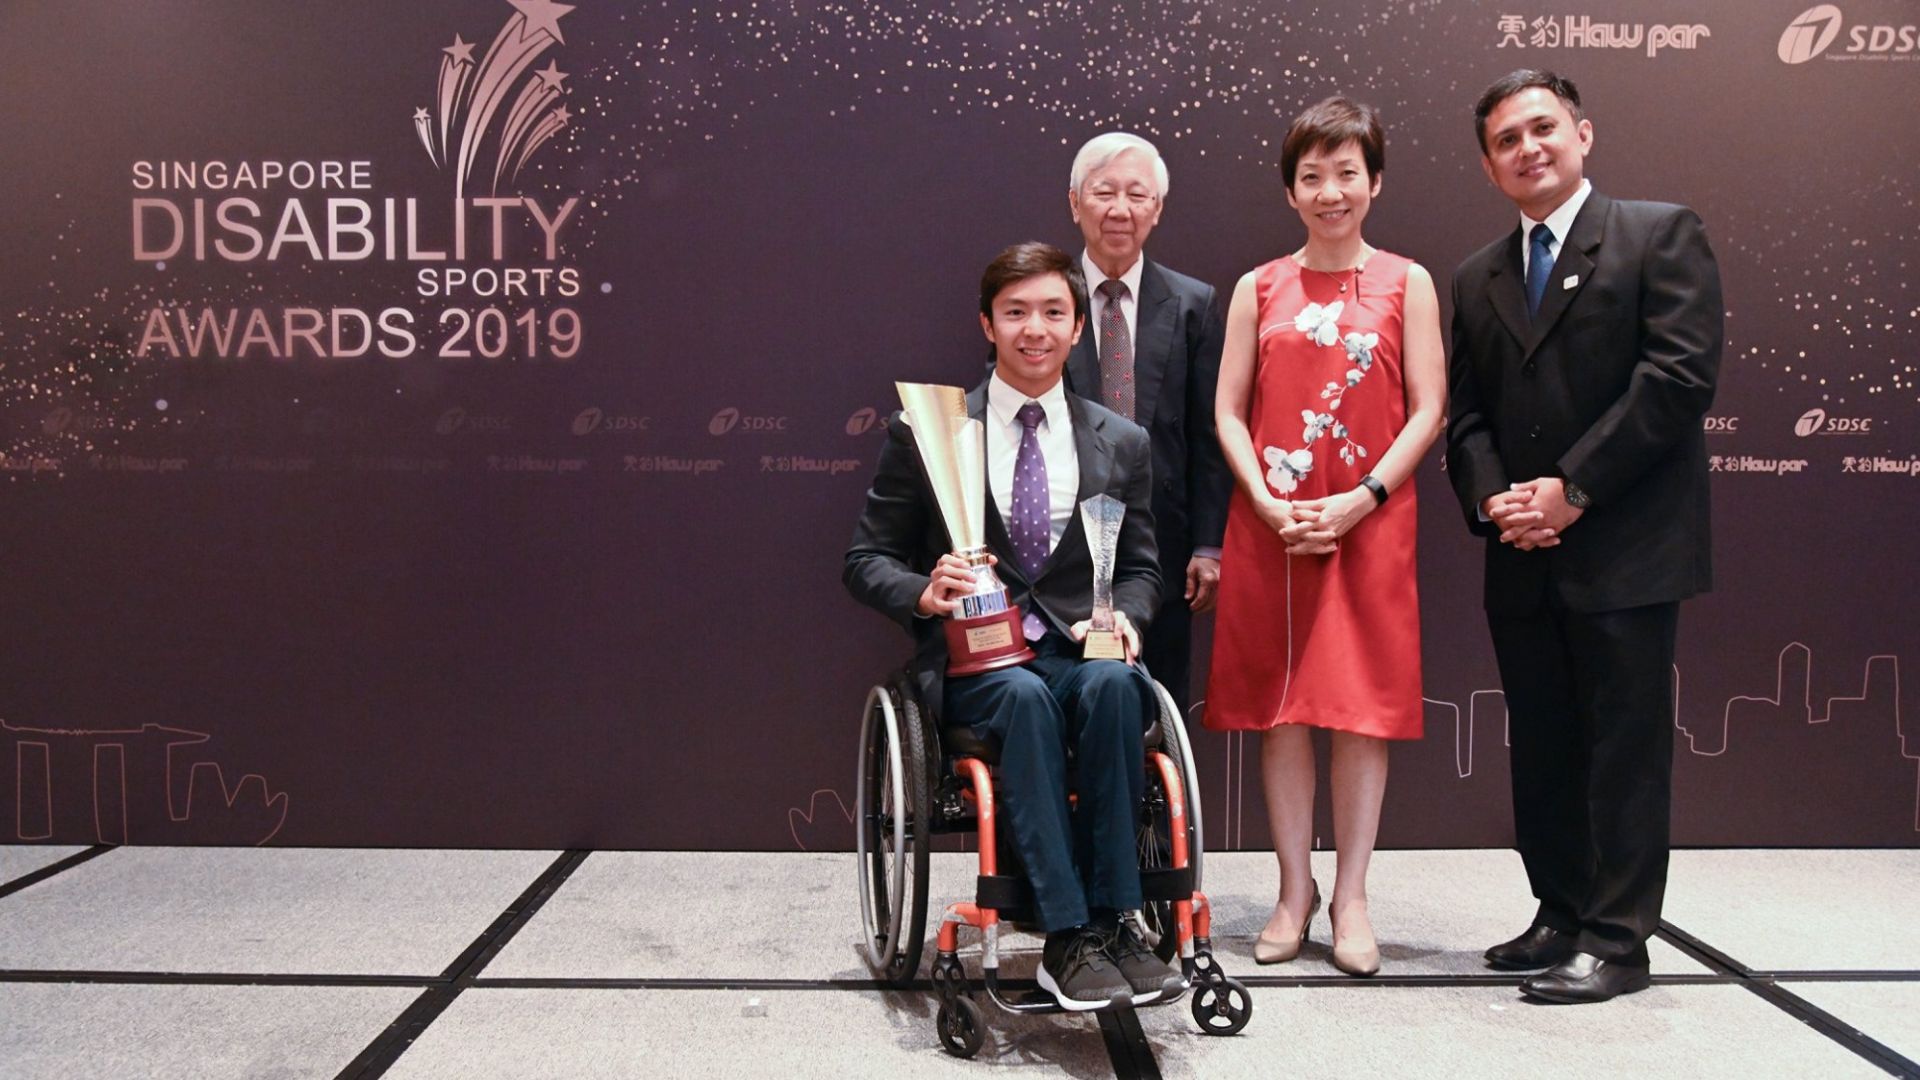 Passion for gold: National para swimmer Toh Wei Soong creates waves